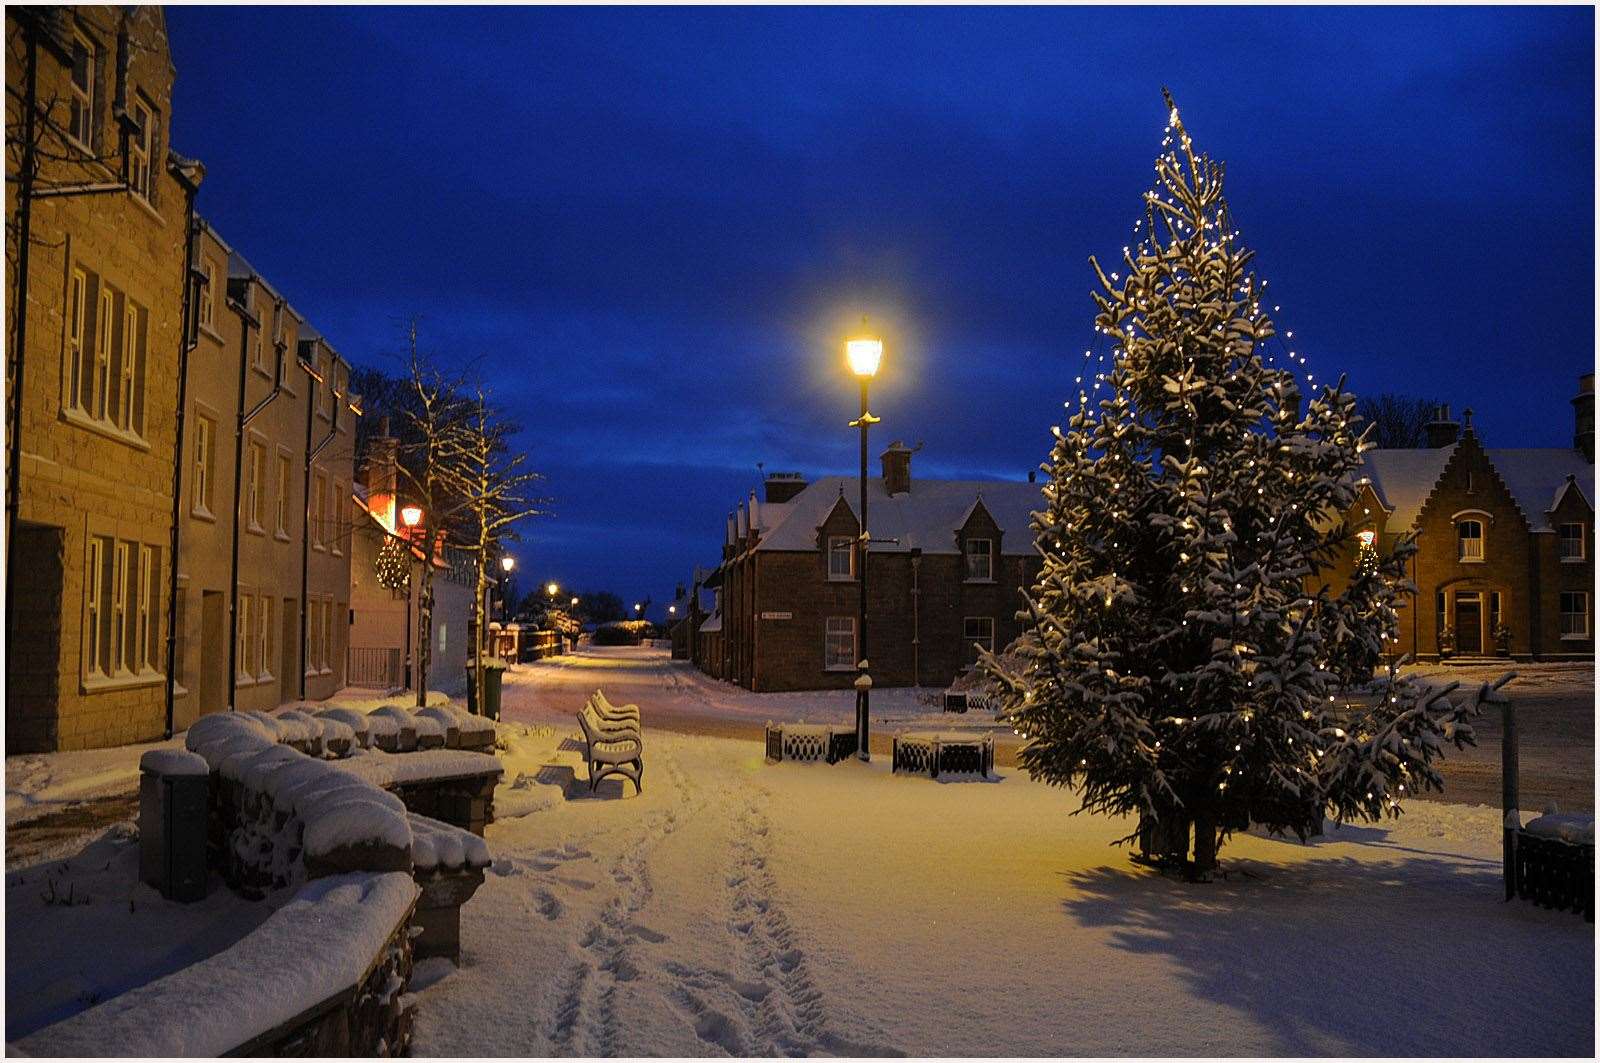 The street lights of Dornoch earned Willie Skinner first place in the colour section with December Snow.